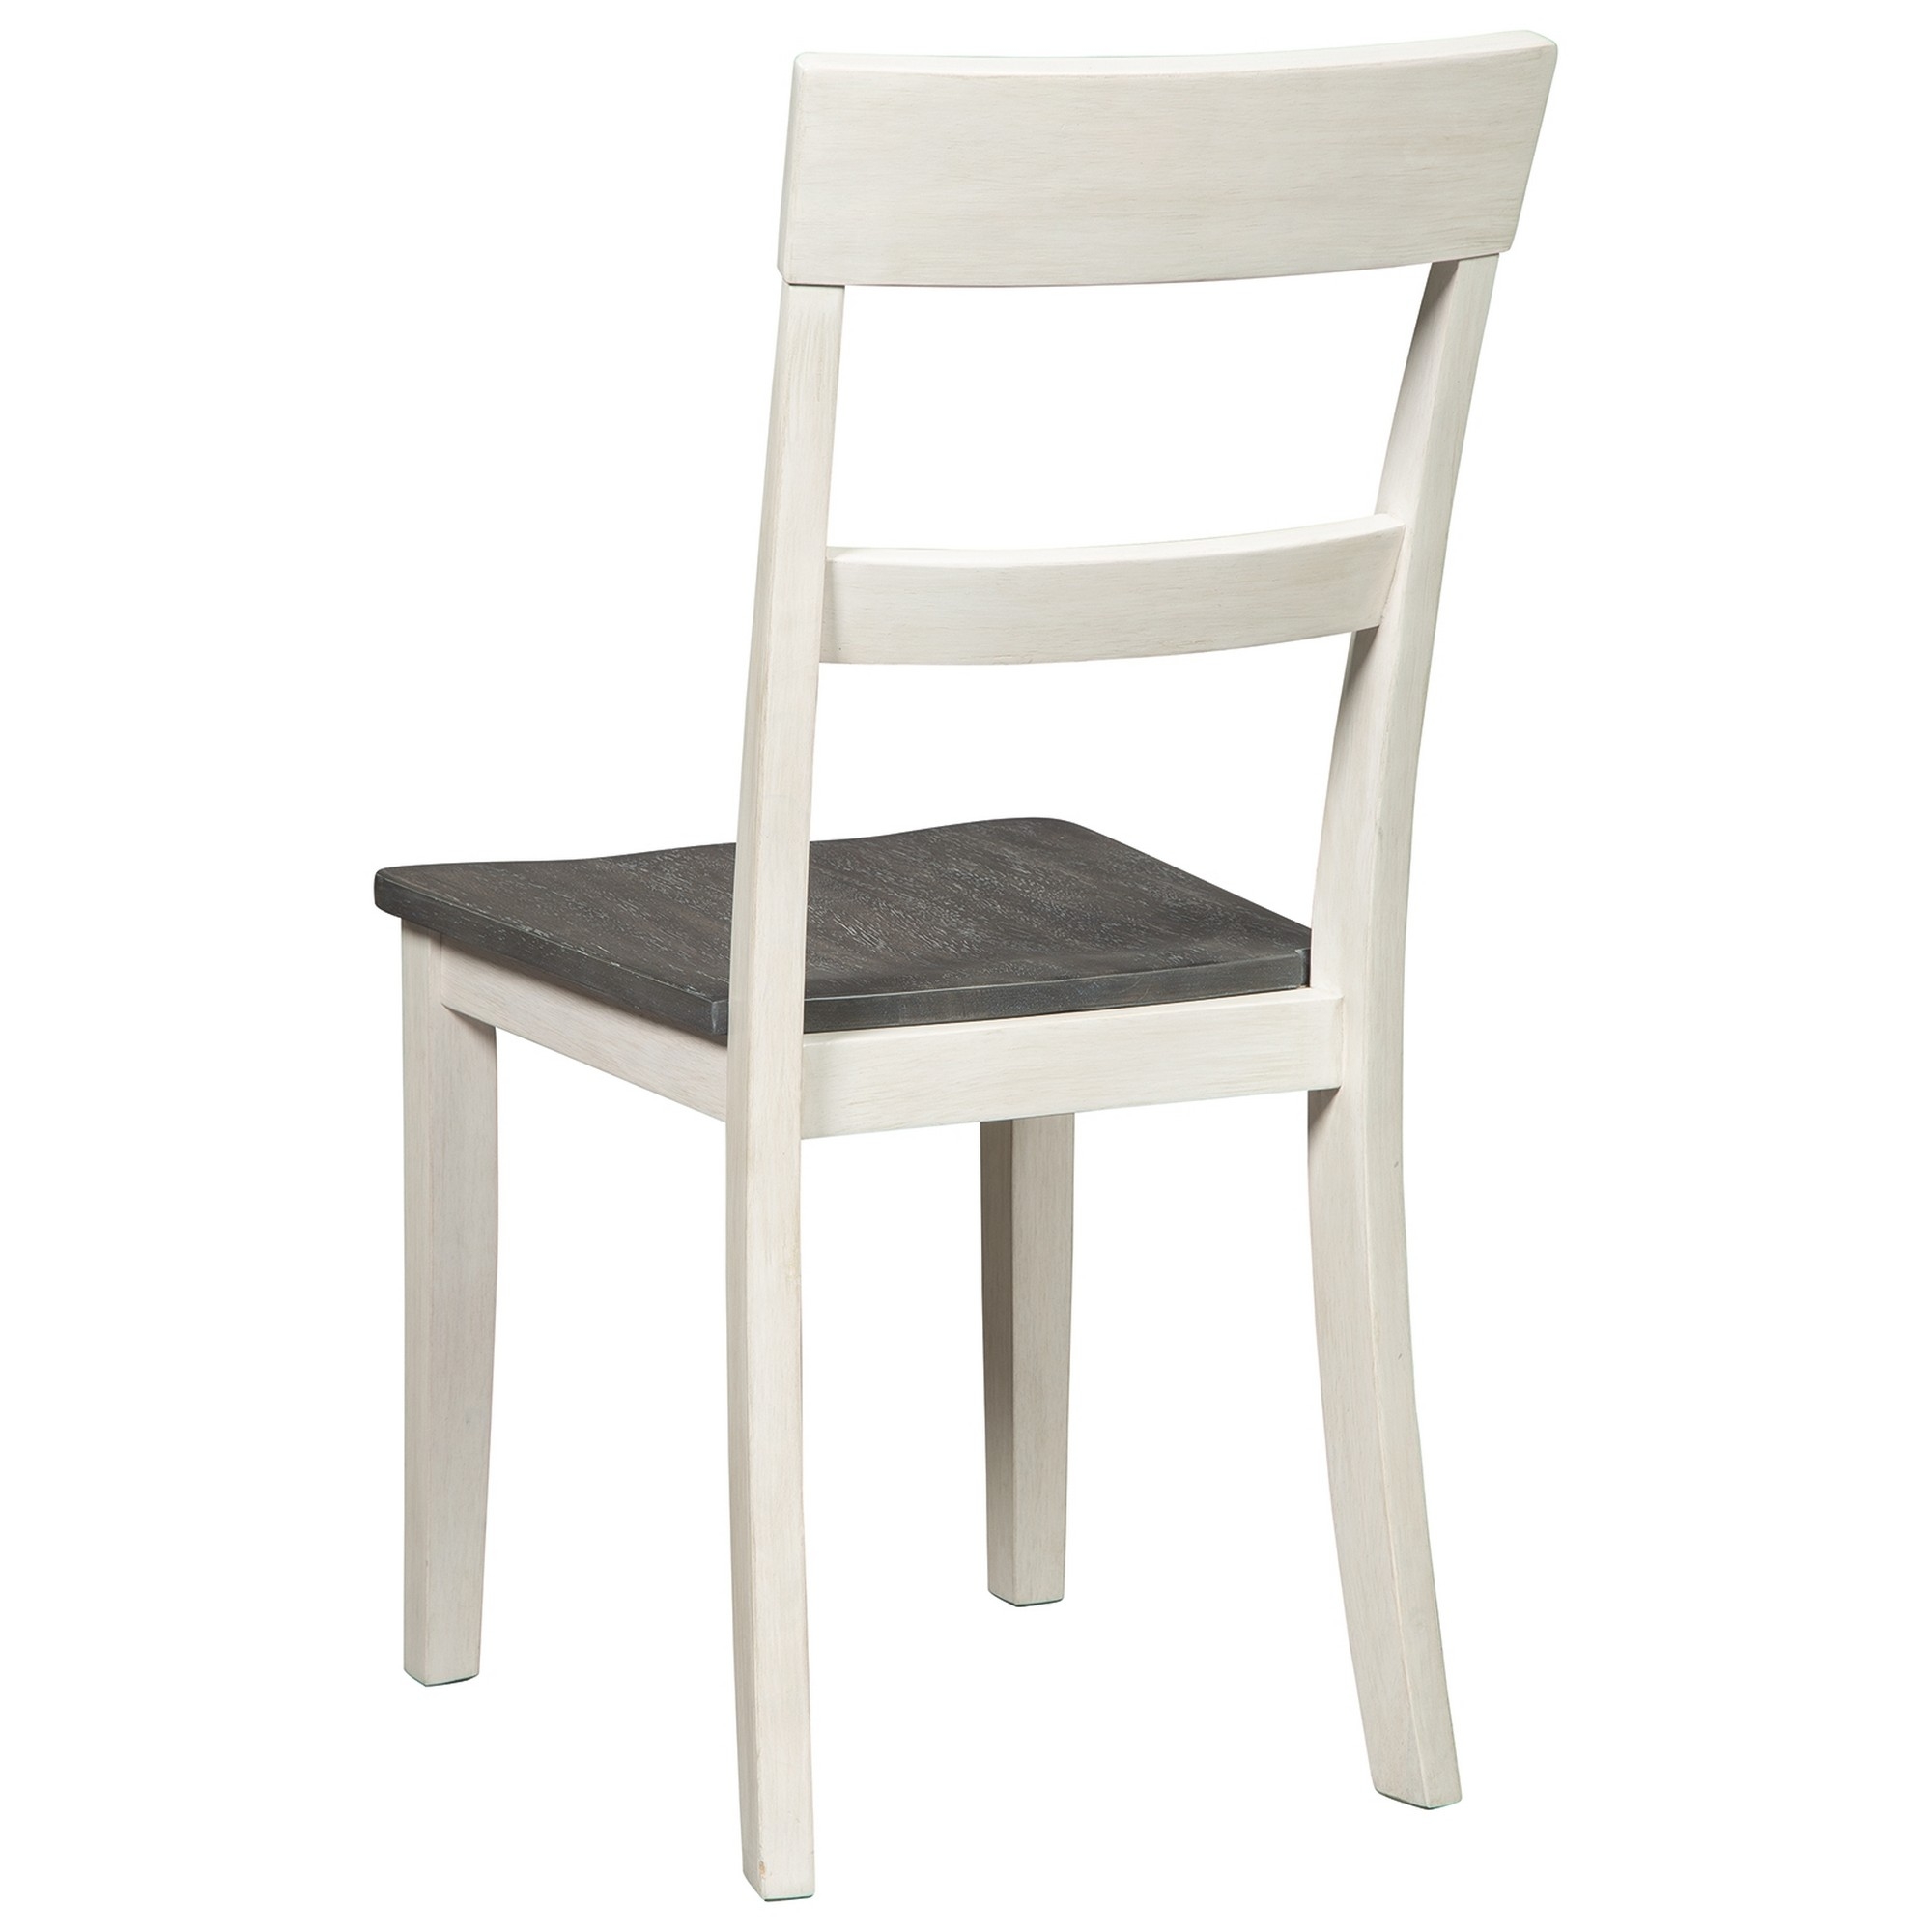 Farmhouse Style Wooden Side Chair With Ladder Style Back, Set Of 2, White- Saltoro Sherpi